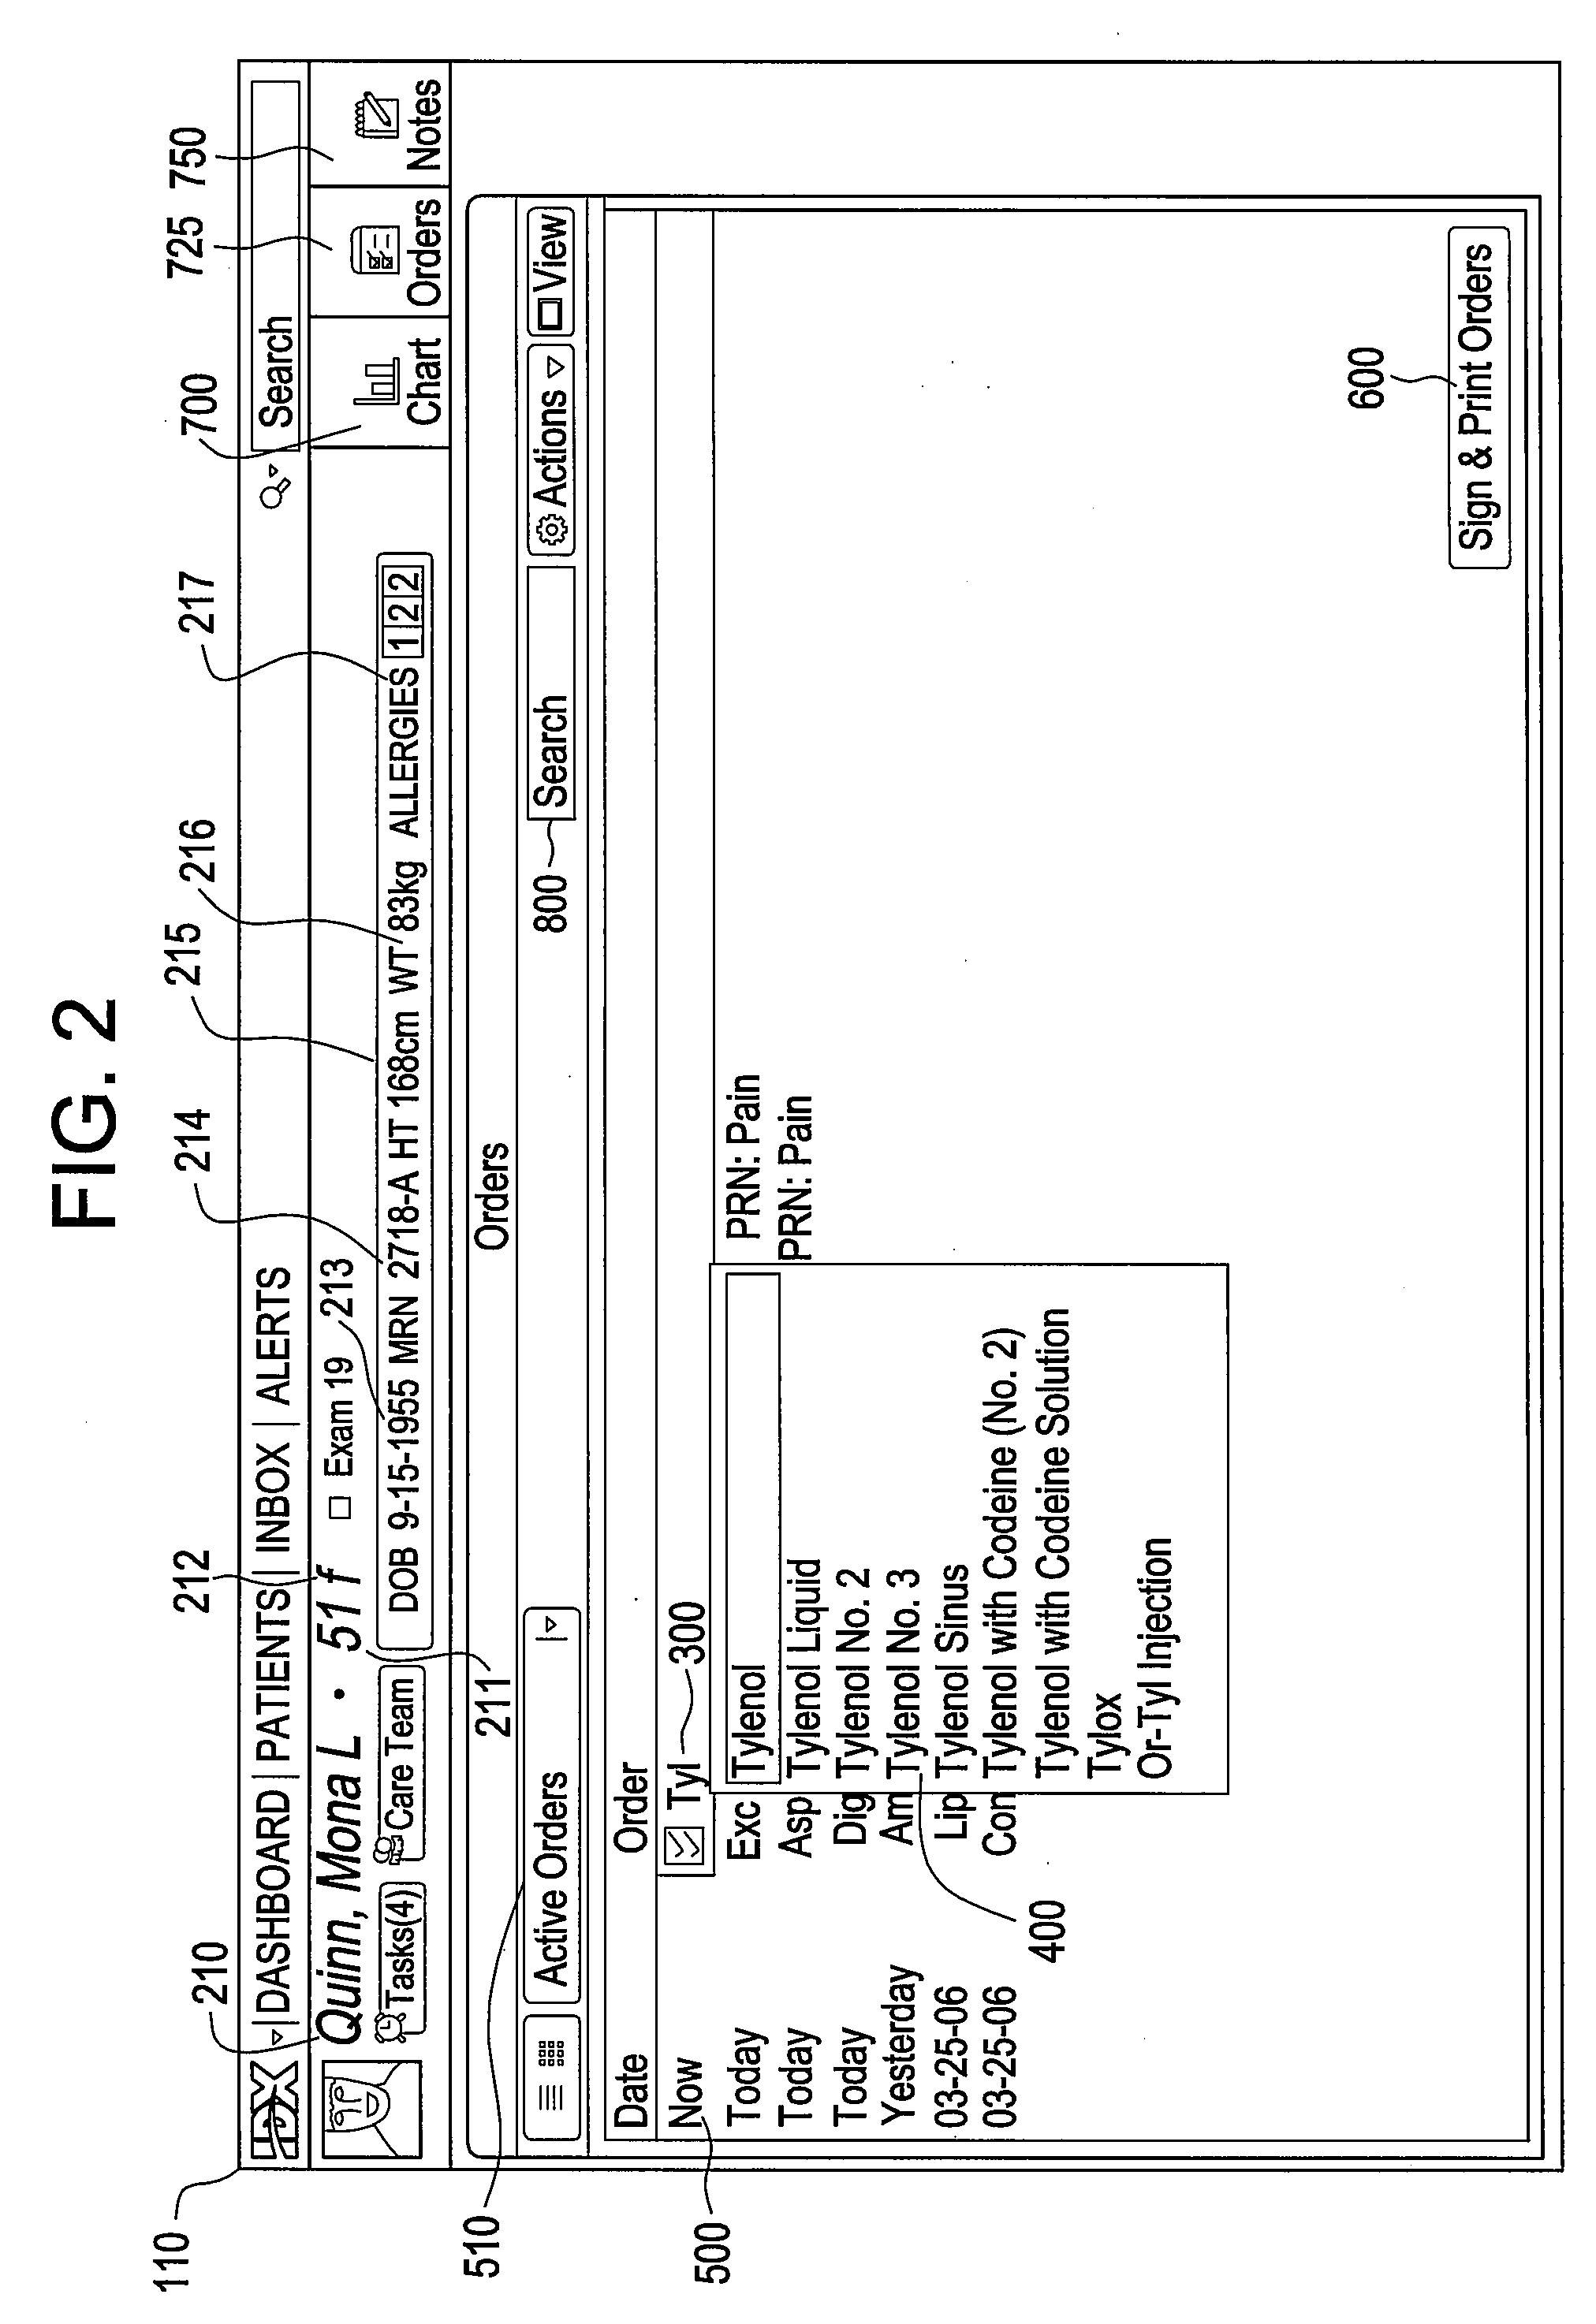 Method and apparatus to enable multiple methods of clinical order input into a healthcare it application